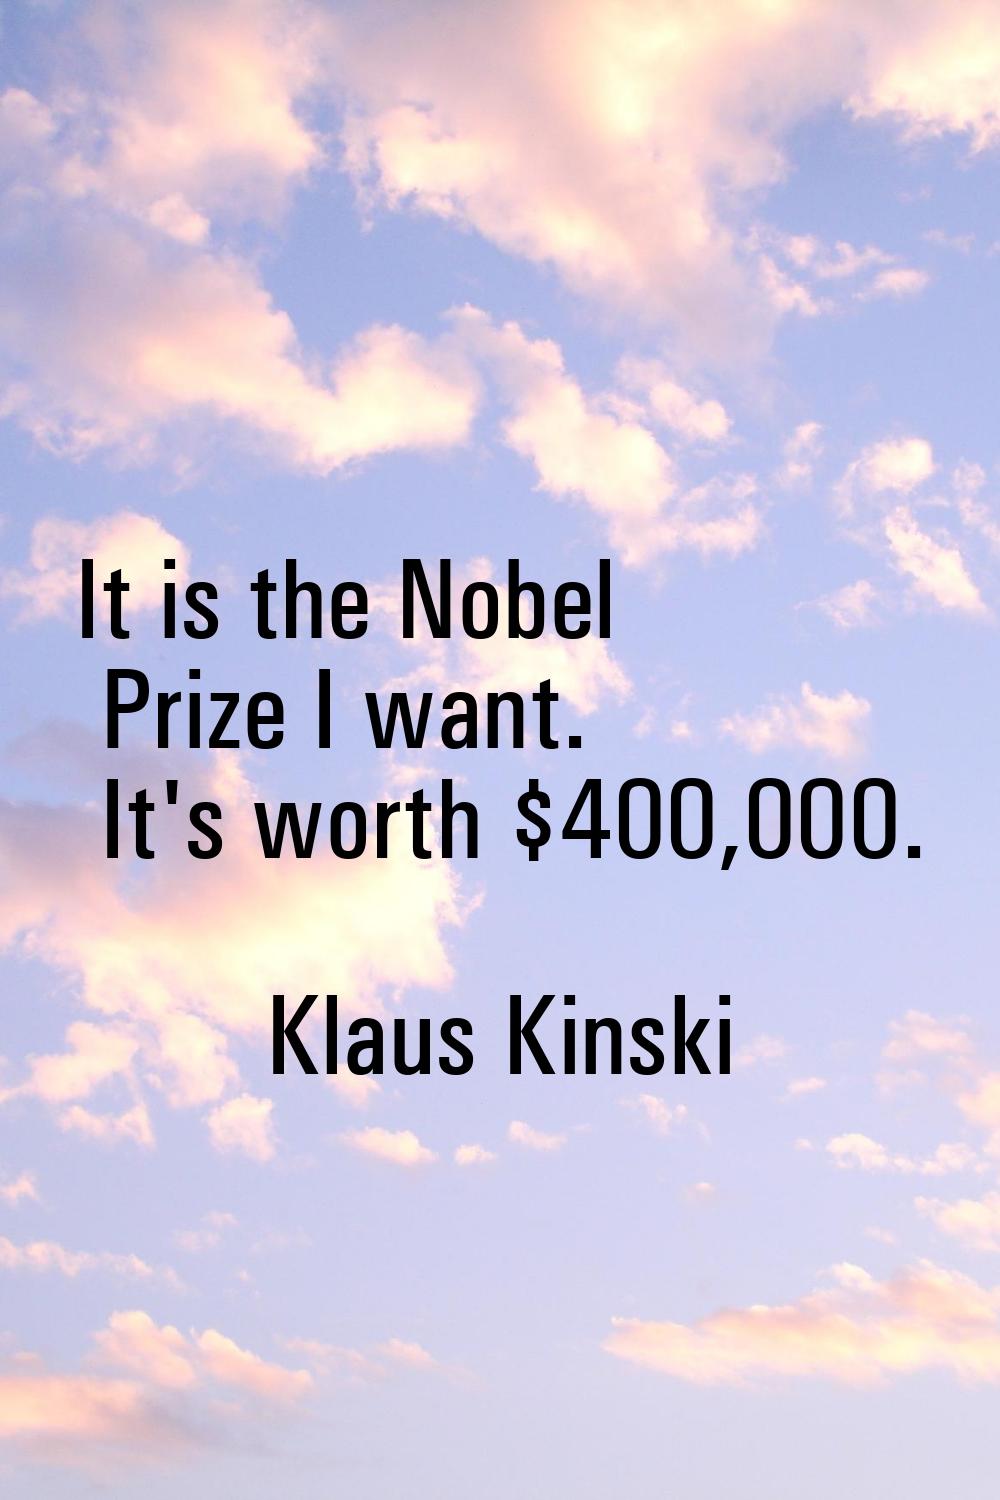 It is the Nobel Prize I want. It's worth $400,000.